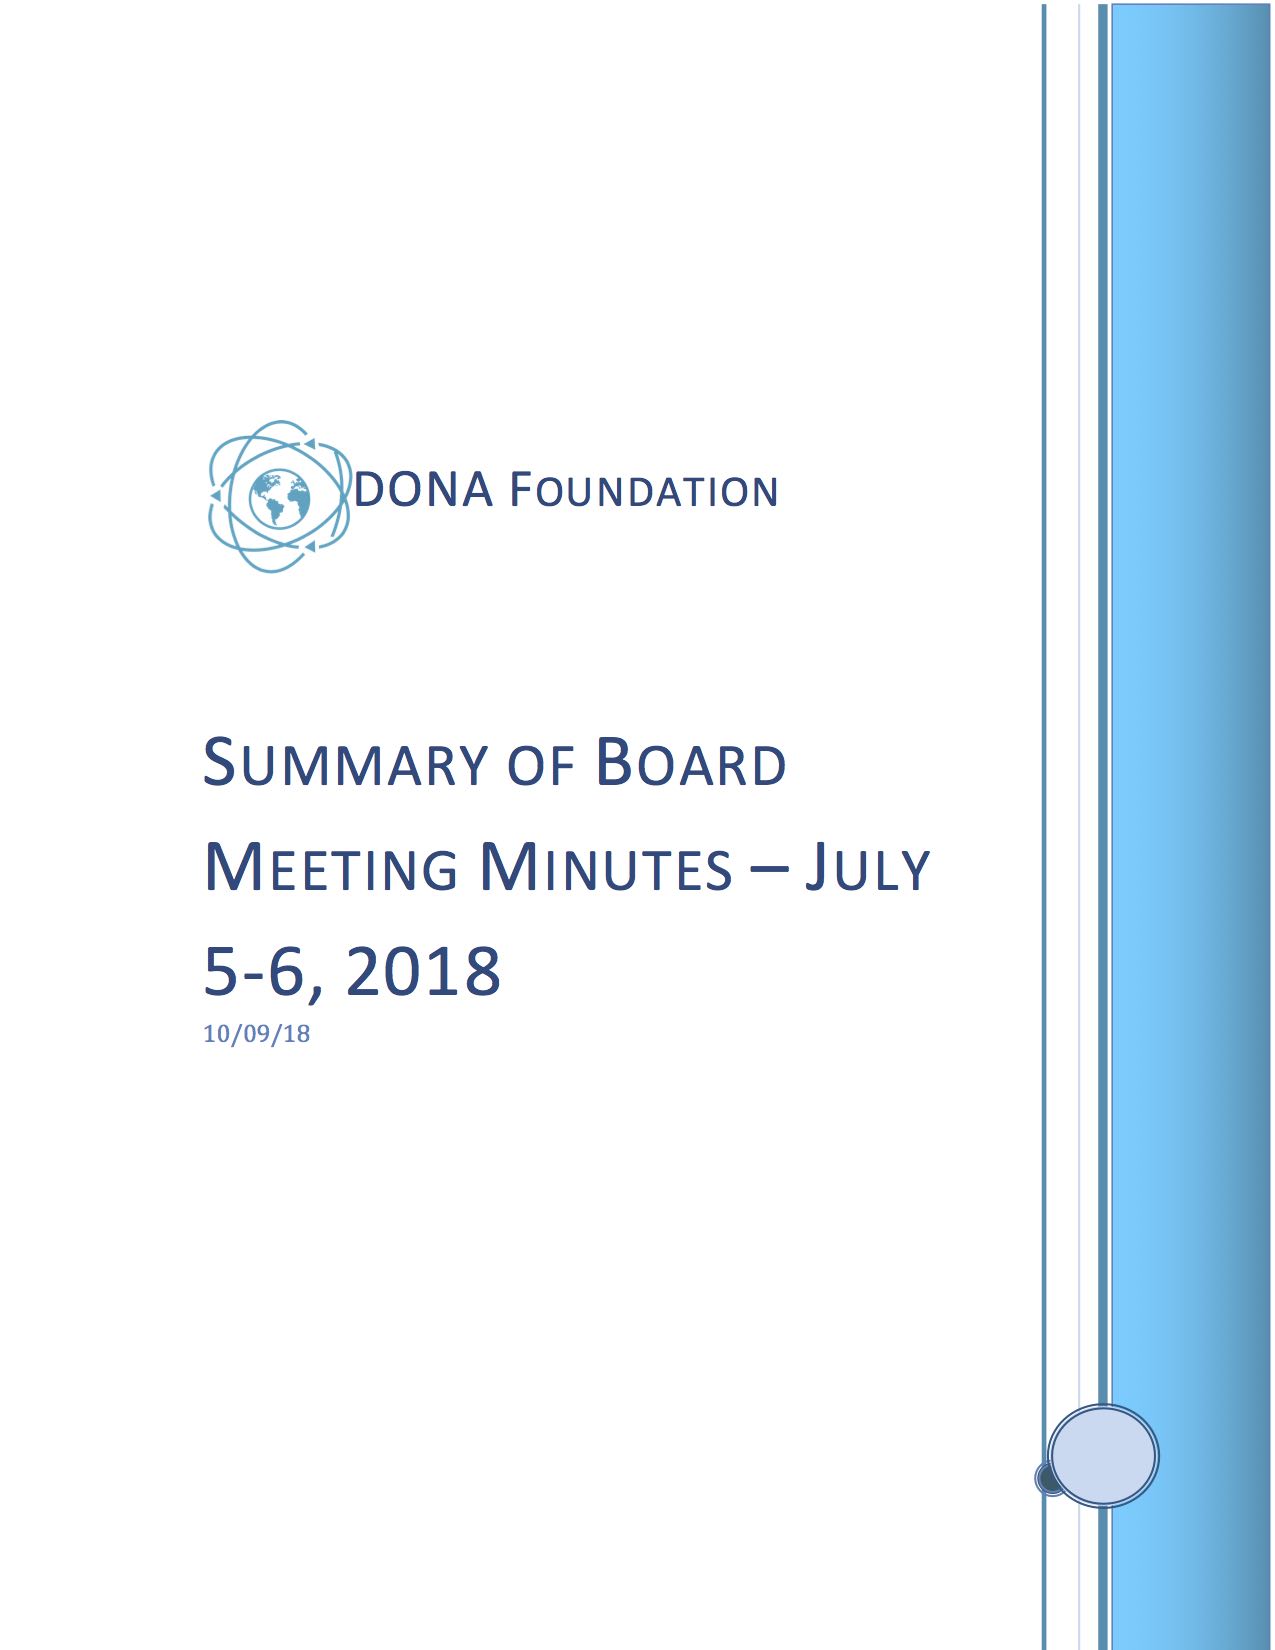 Summary of Board Minutes July 5-6, 2018